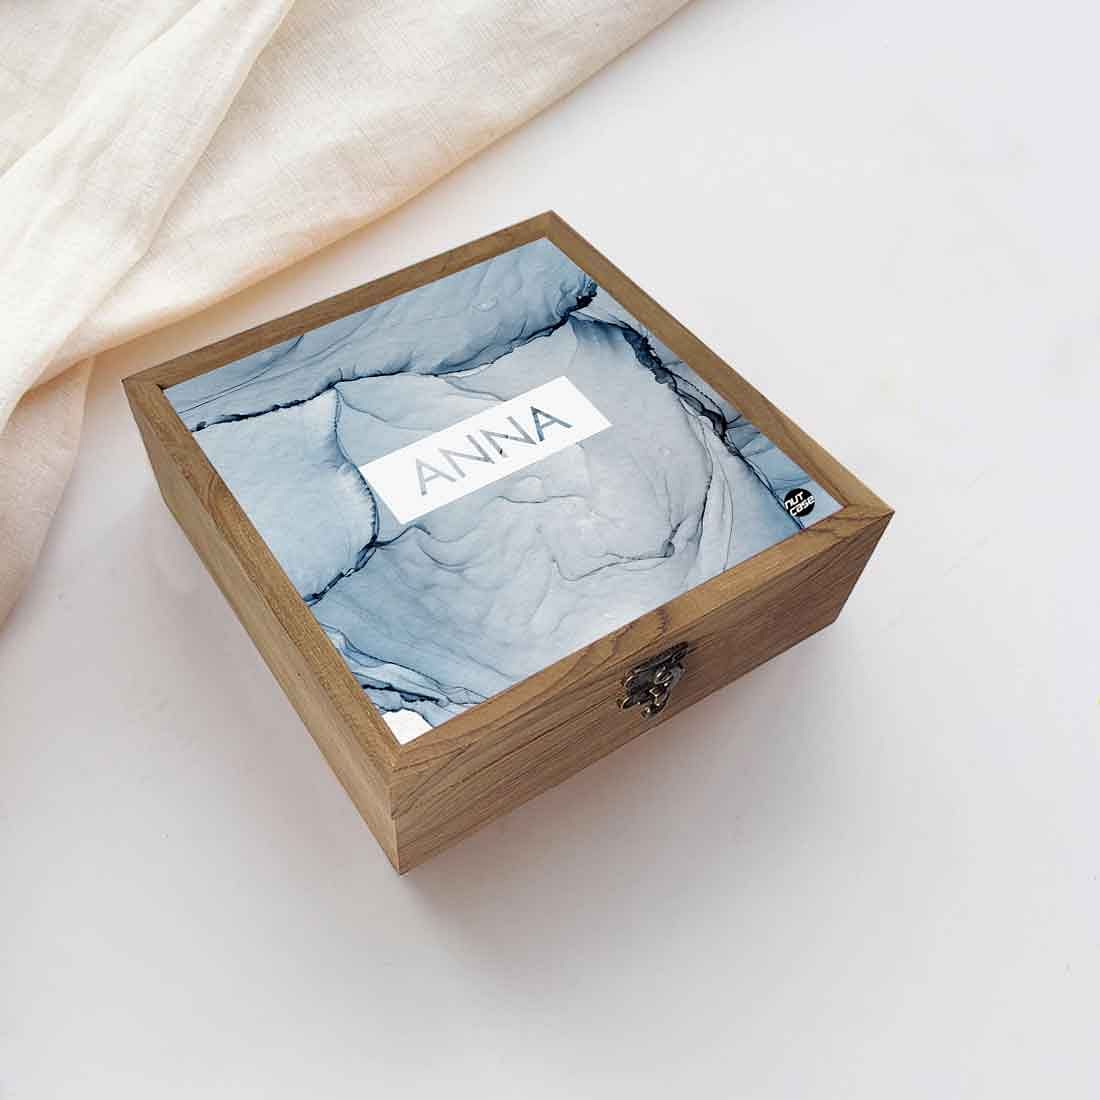 Customized Jewellery Box With Name - Gray Ink Watercolor Nutcase